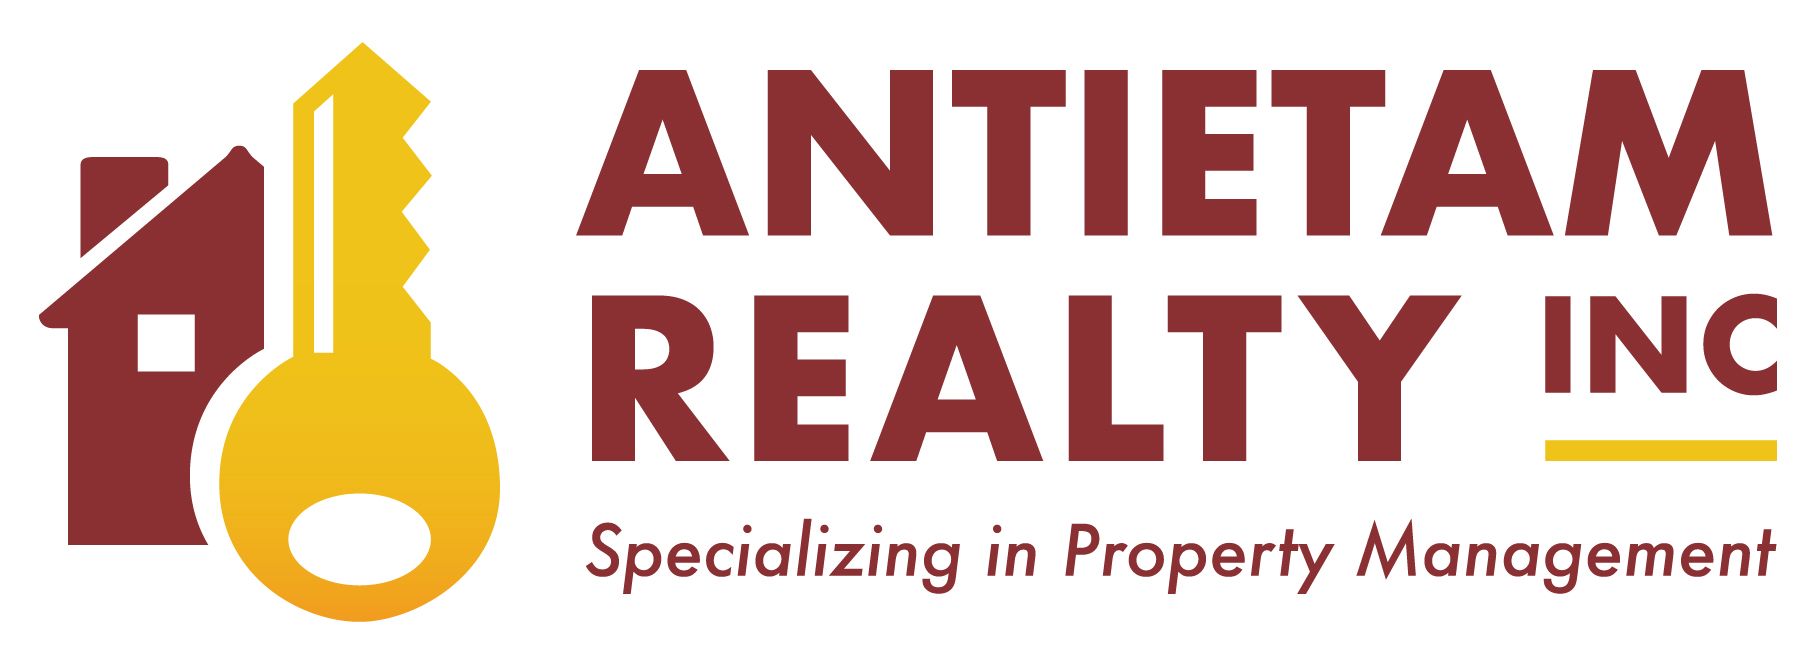 Antietam Realty Header Logo - Select to go to Home Page